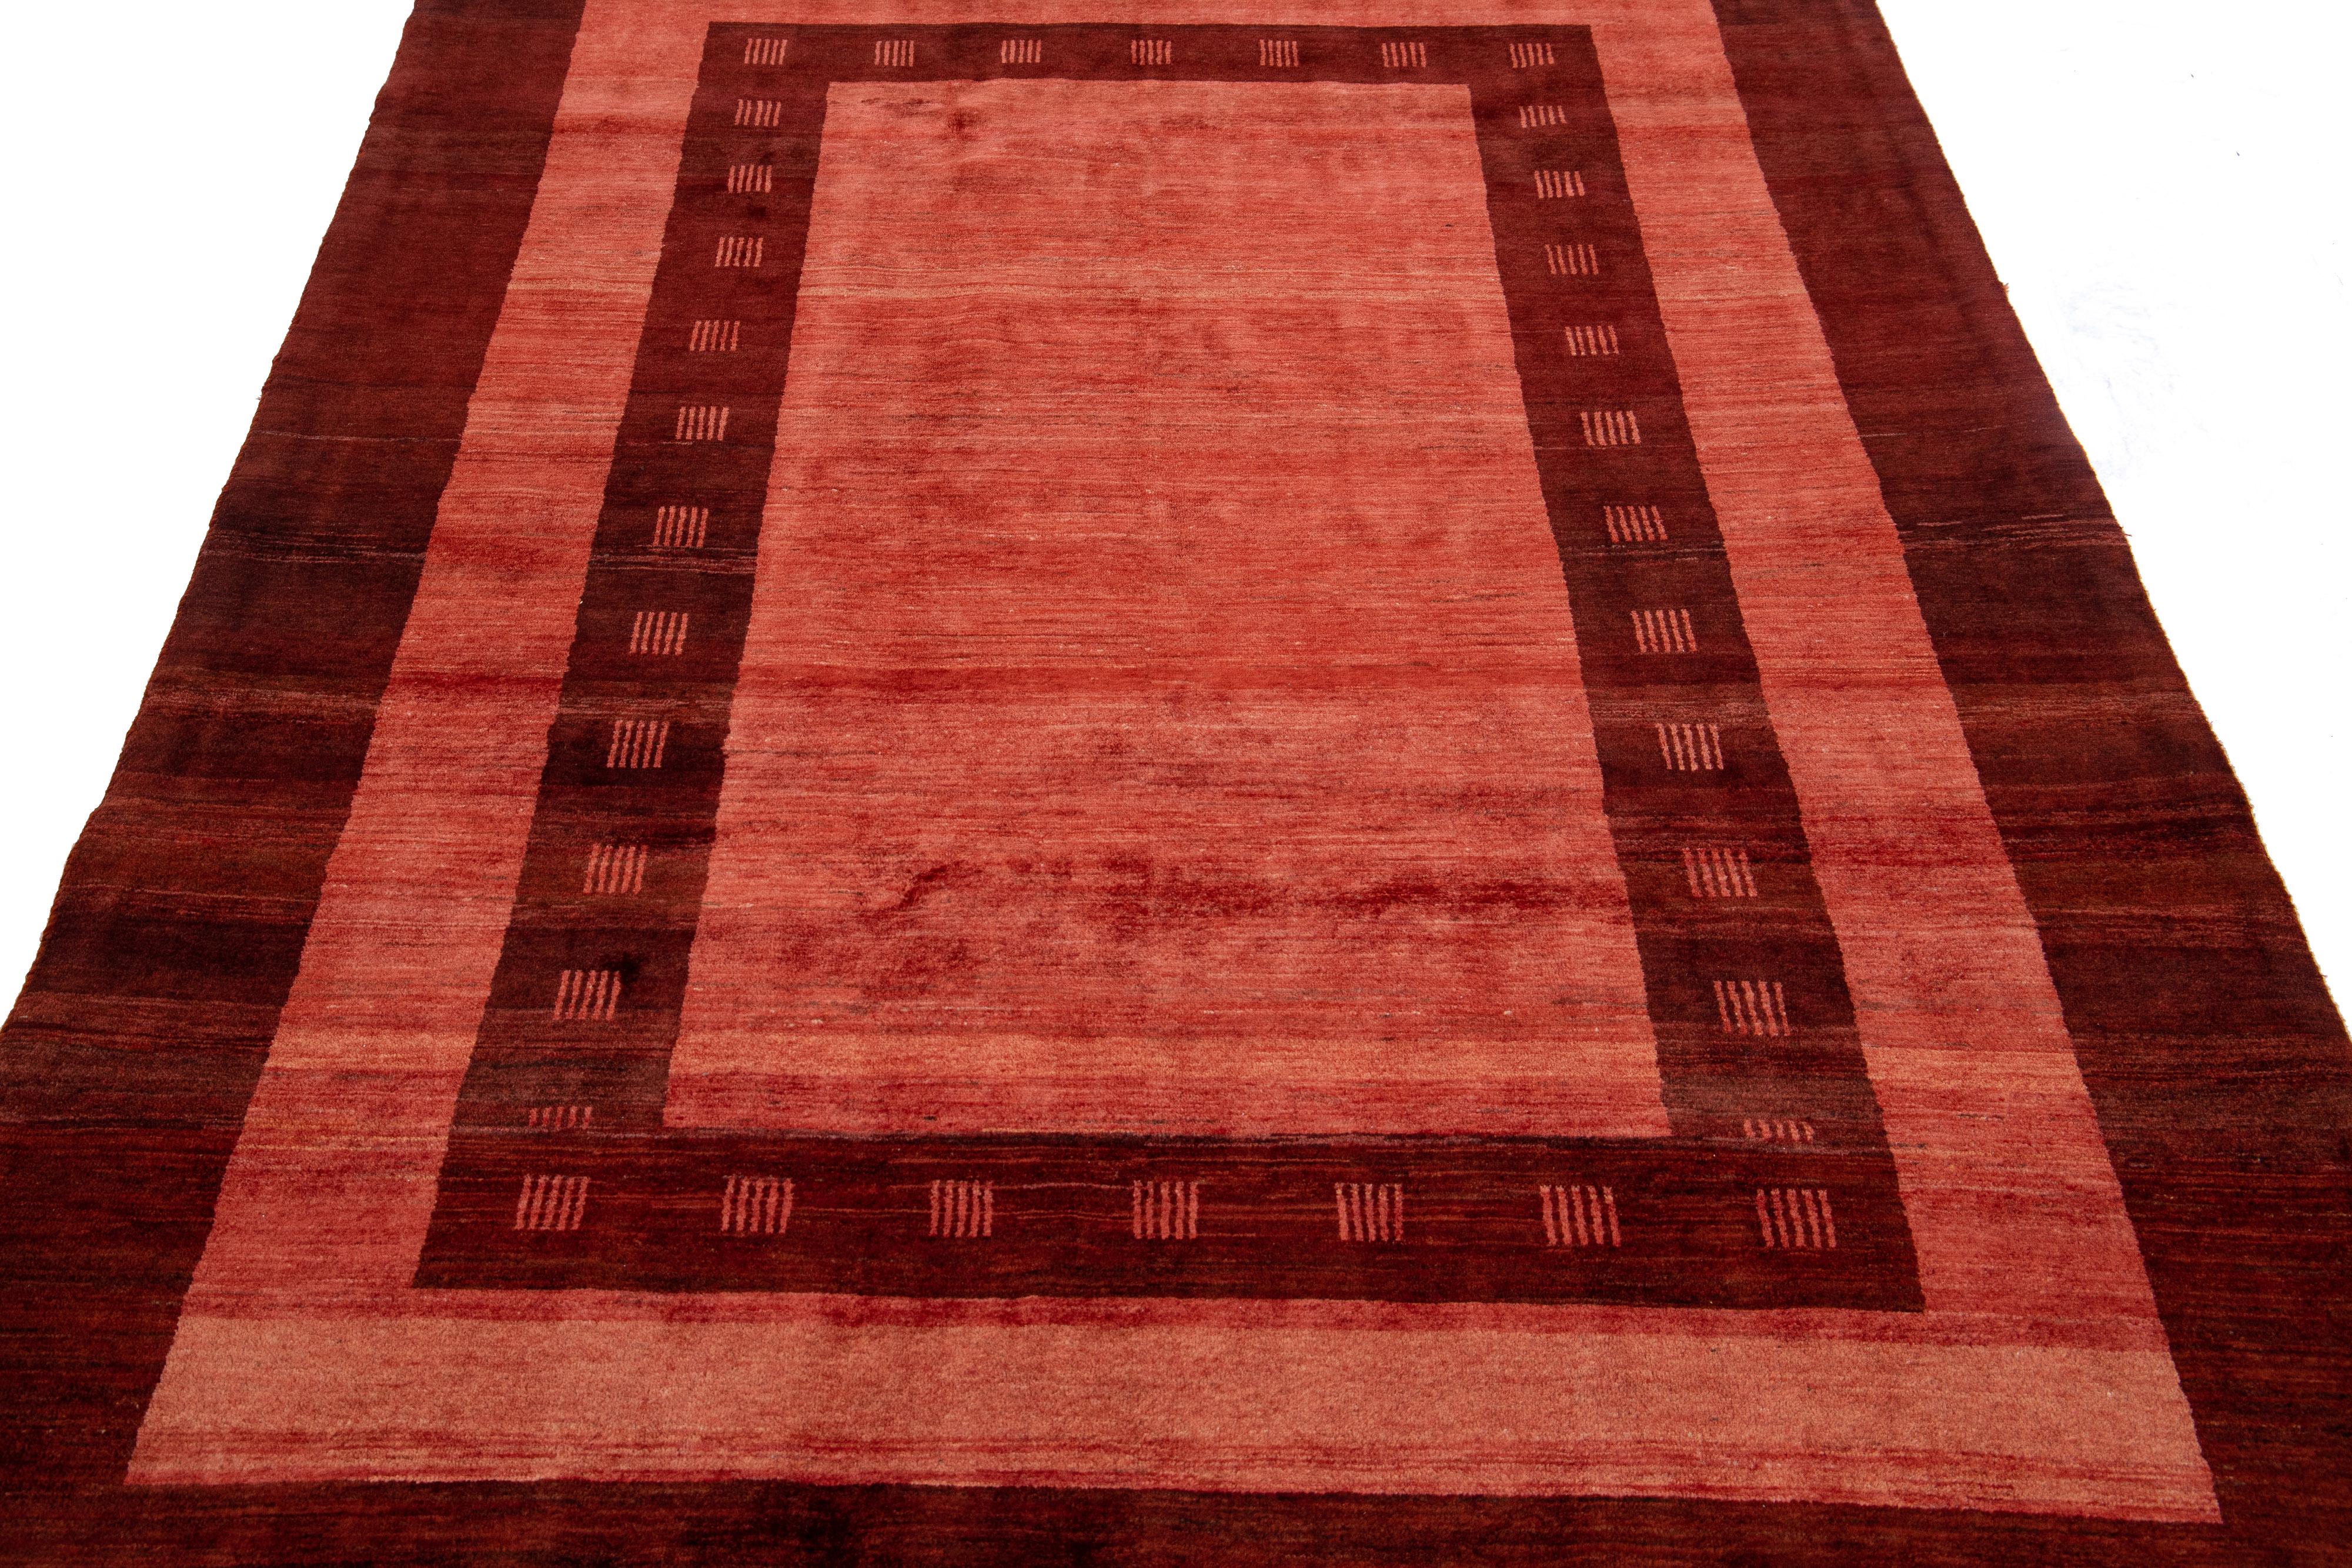 Beautiful modern Gabbeh-style hand-woven wool rug with a red color field. This Persian rug has a gorgeously minimalist design with burgundy accents.

This rug measures: 5'7